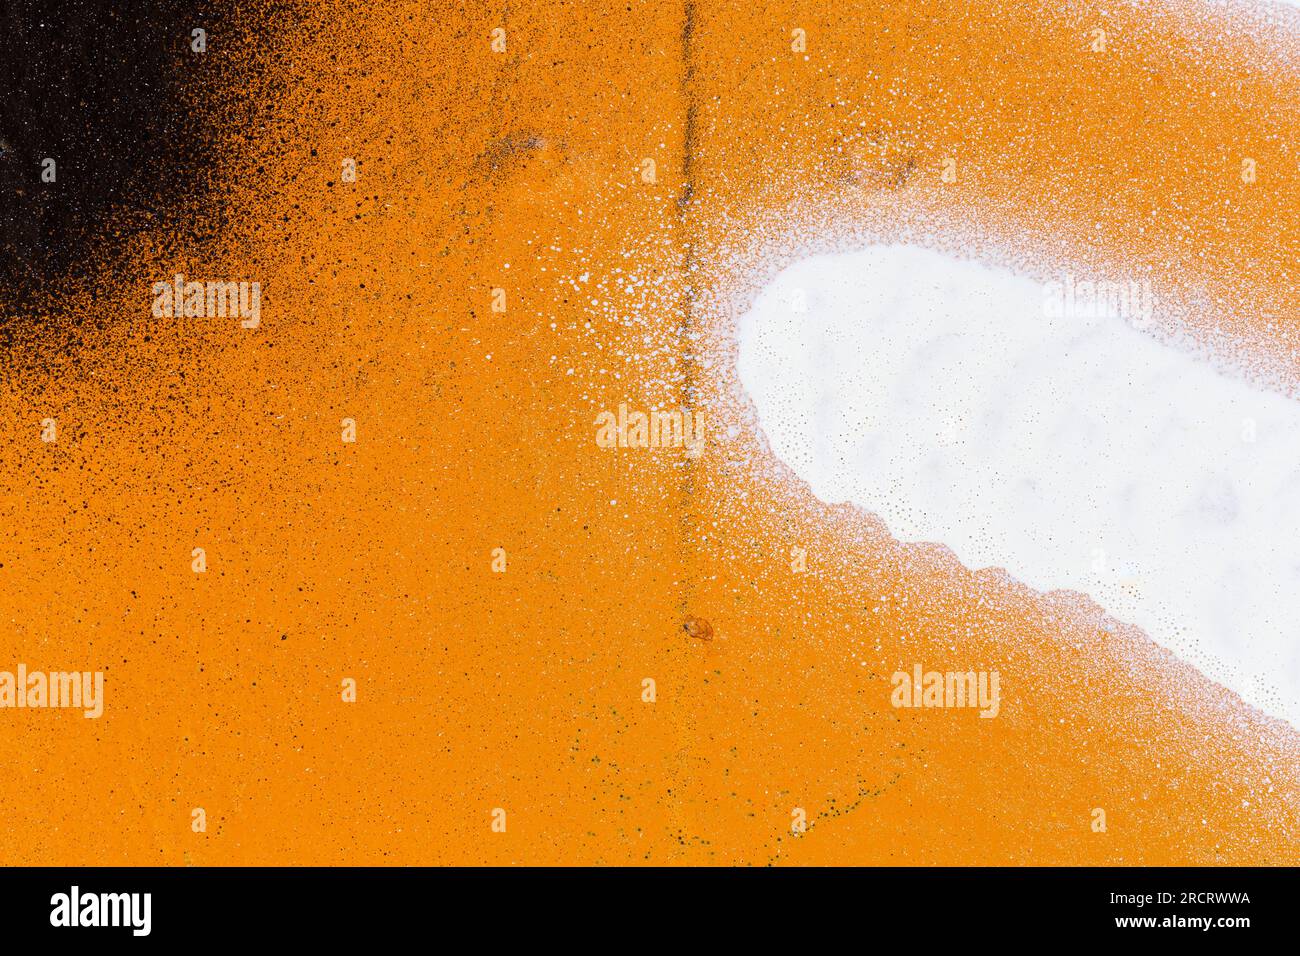 Macro close-up of a wall spray painted with orange, black and white with splashes. Abstract textured & splattered graffiti background with copy space. Stock Photo